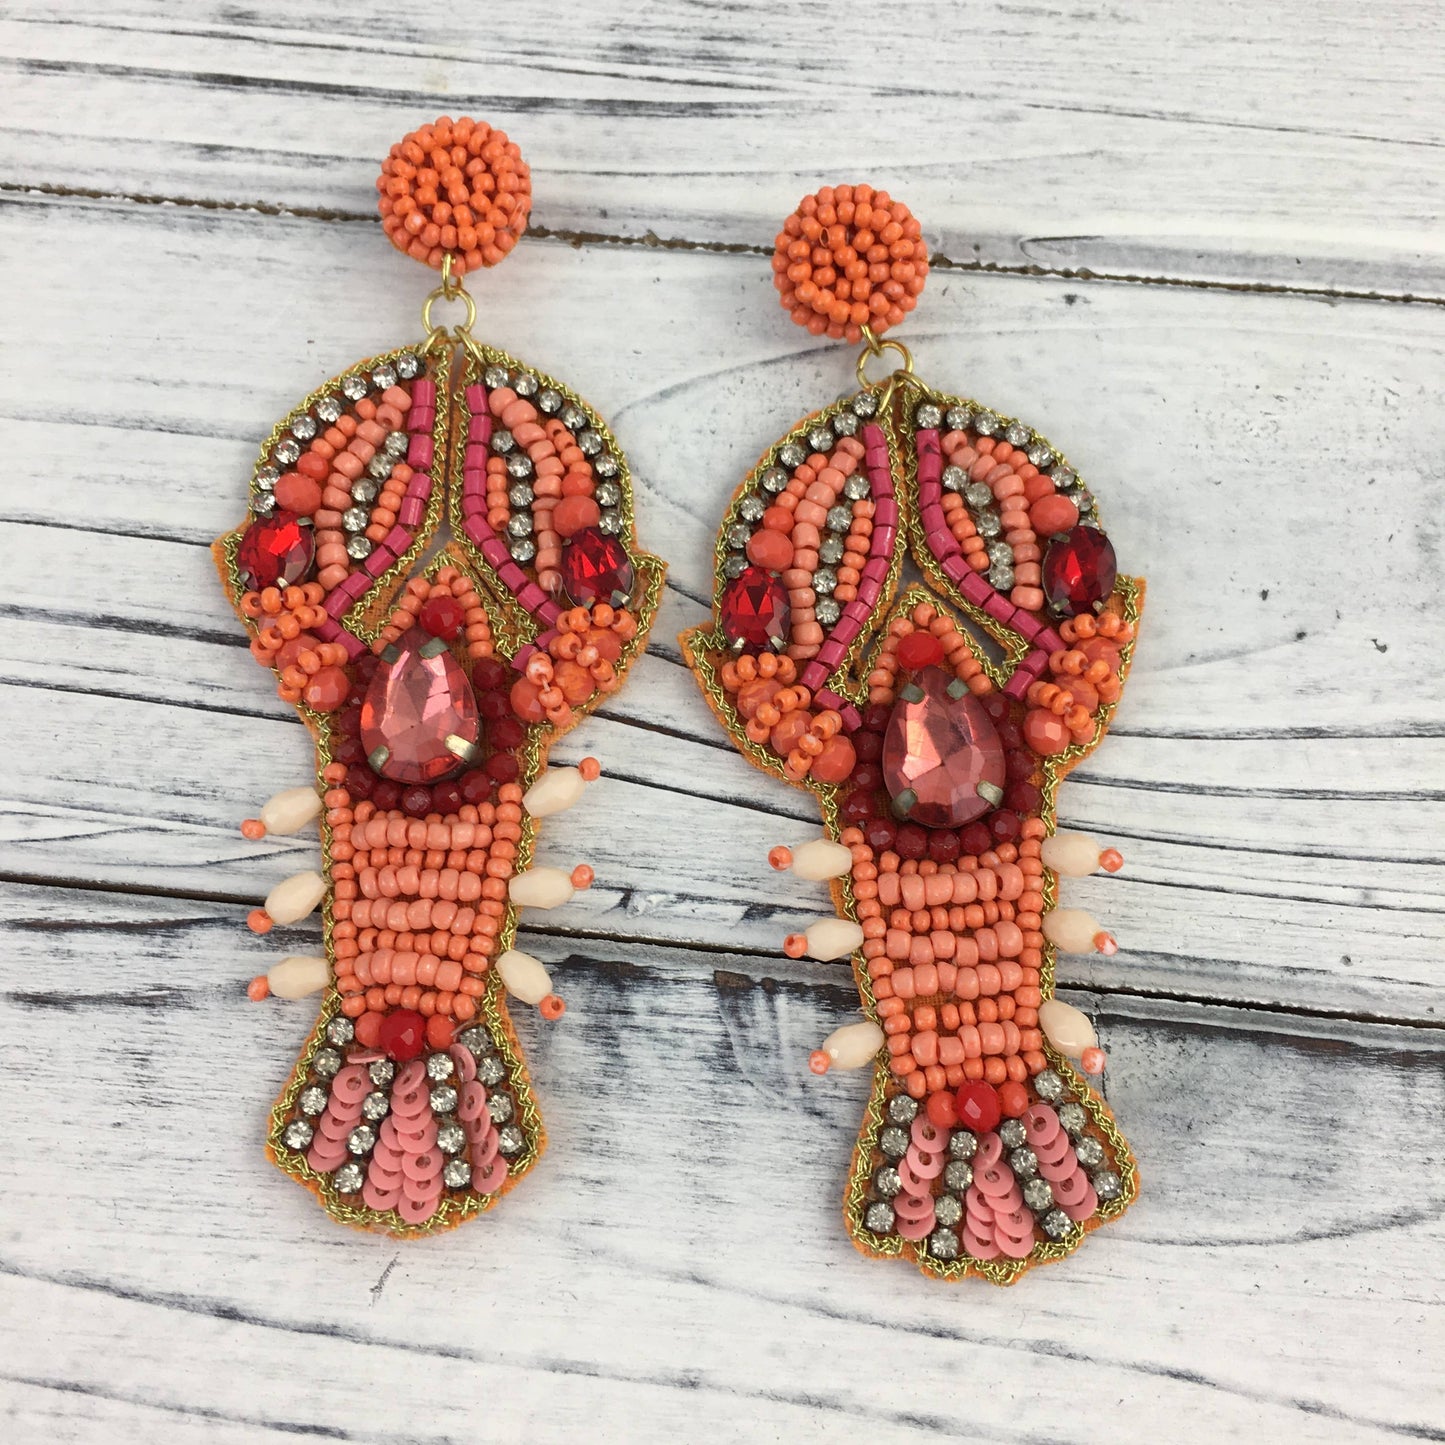 A pair of SongLily Bead and Stone Crawfish Earrings inspired by Mardi Gras on a wooden table.